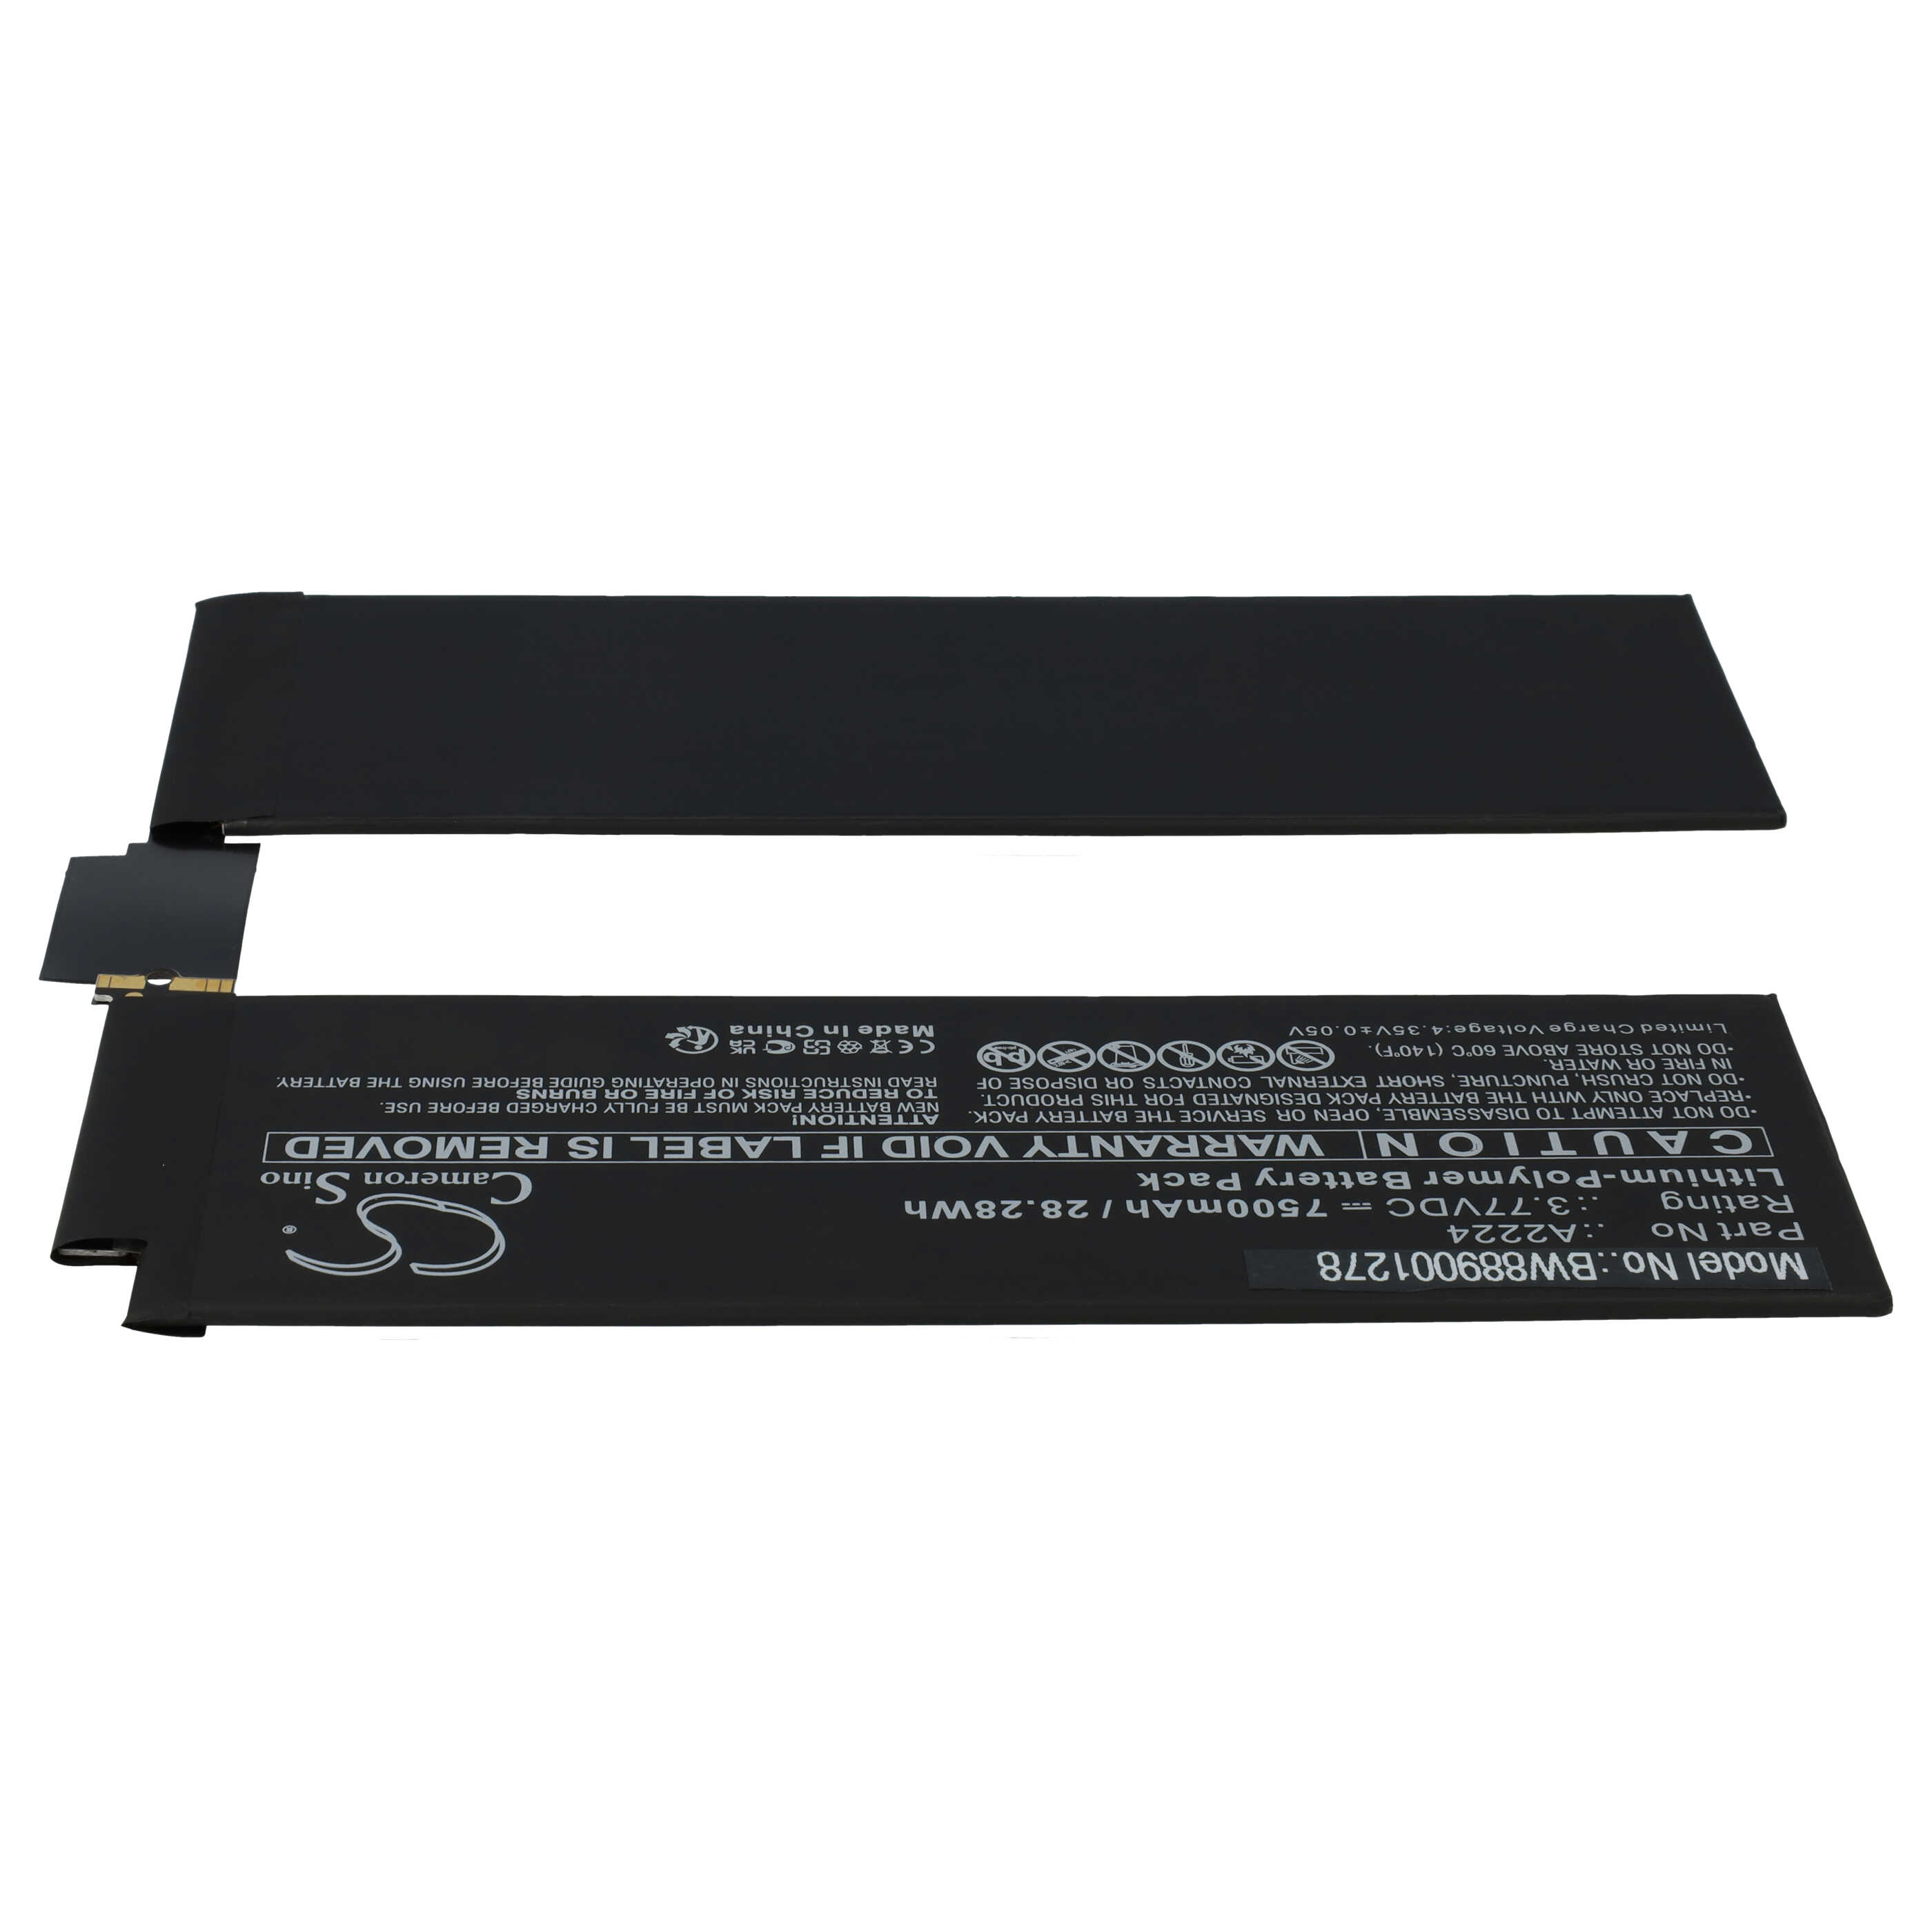 Tablet Battery Replacement for Apple A2224 - 7500mAh 3.77V Li-polymer